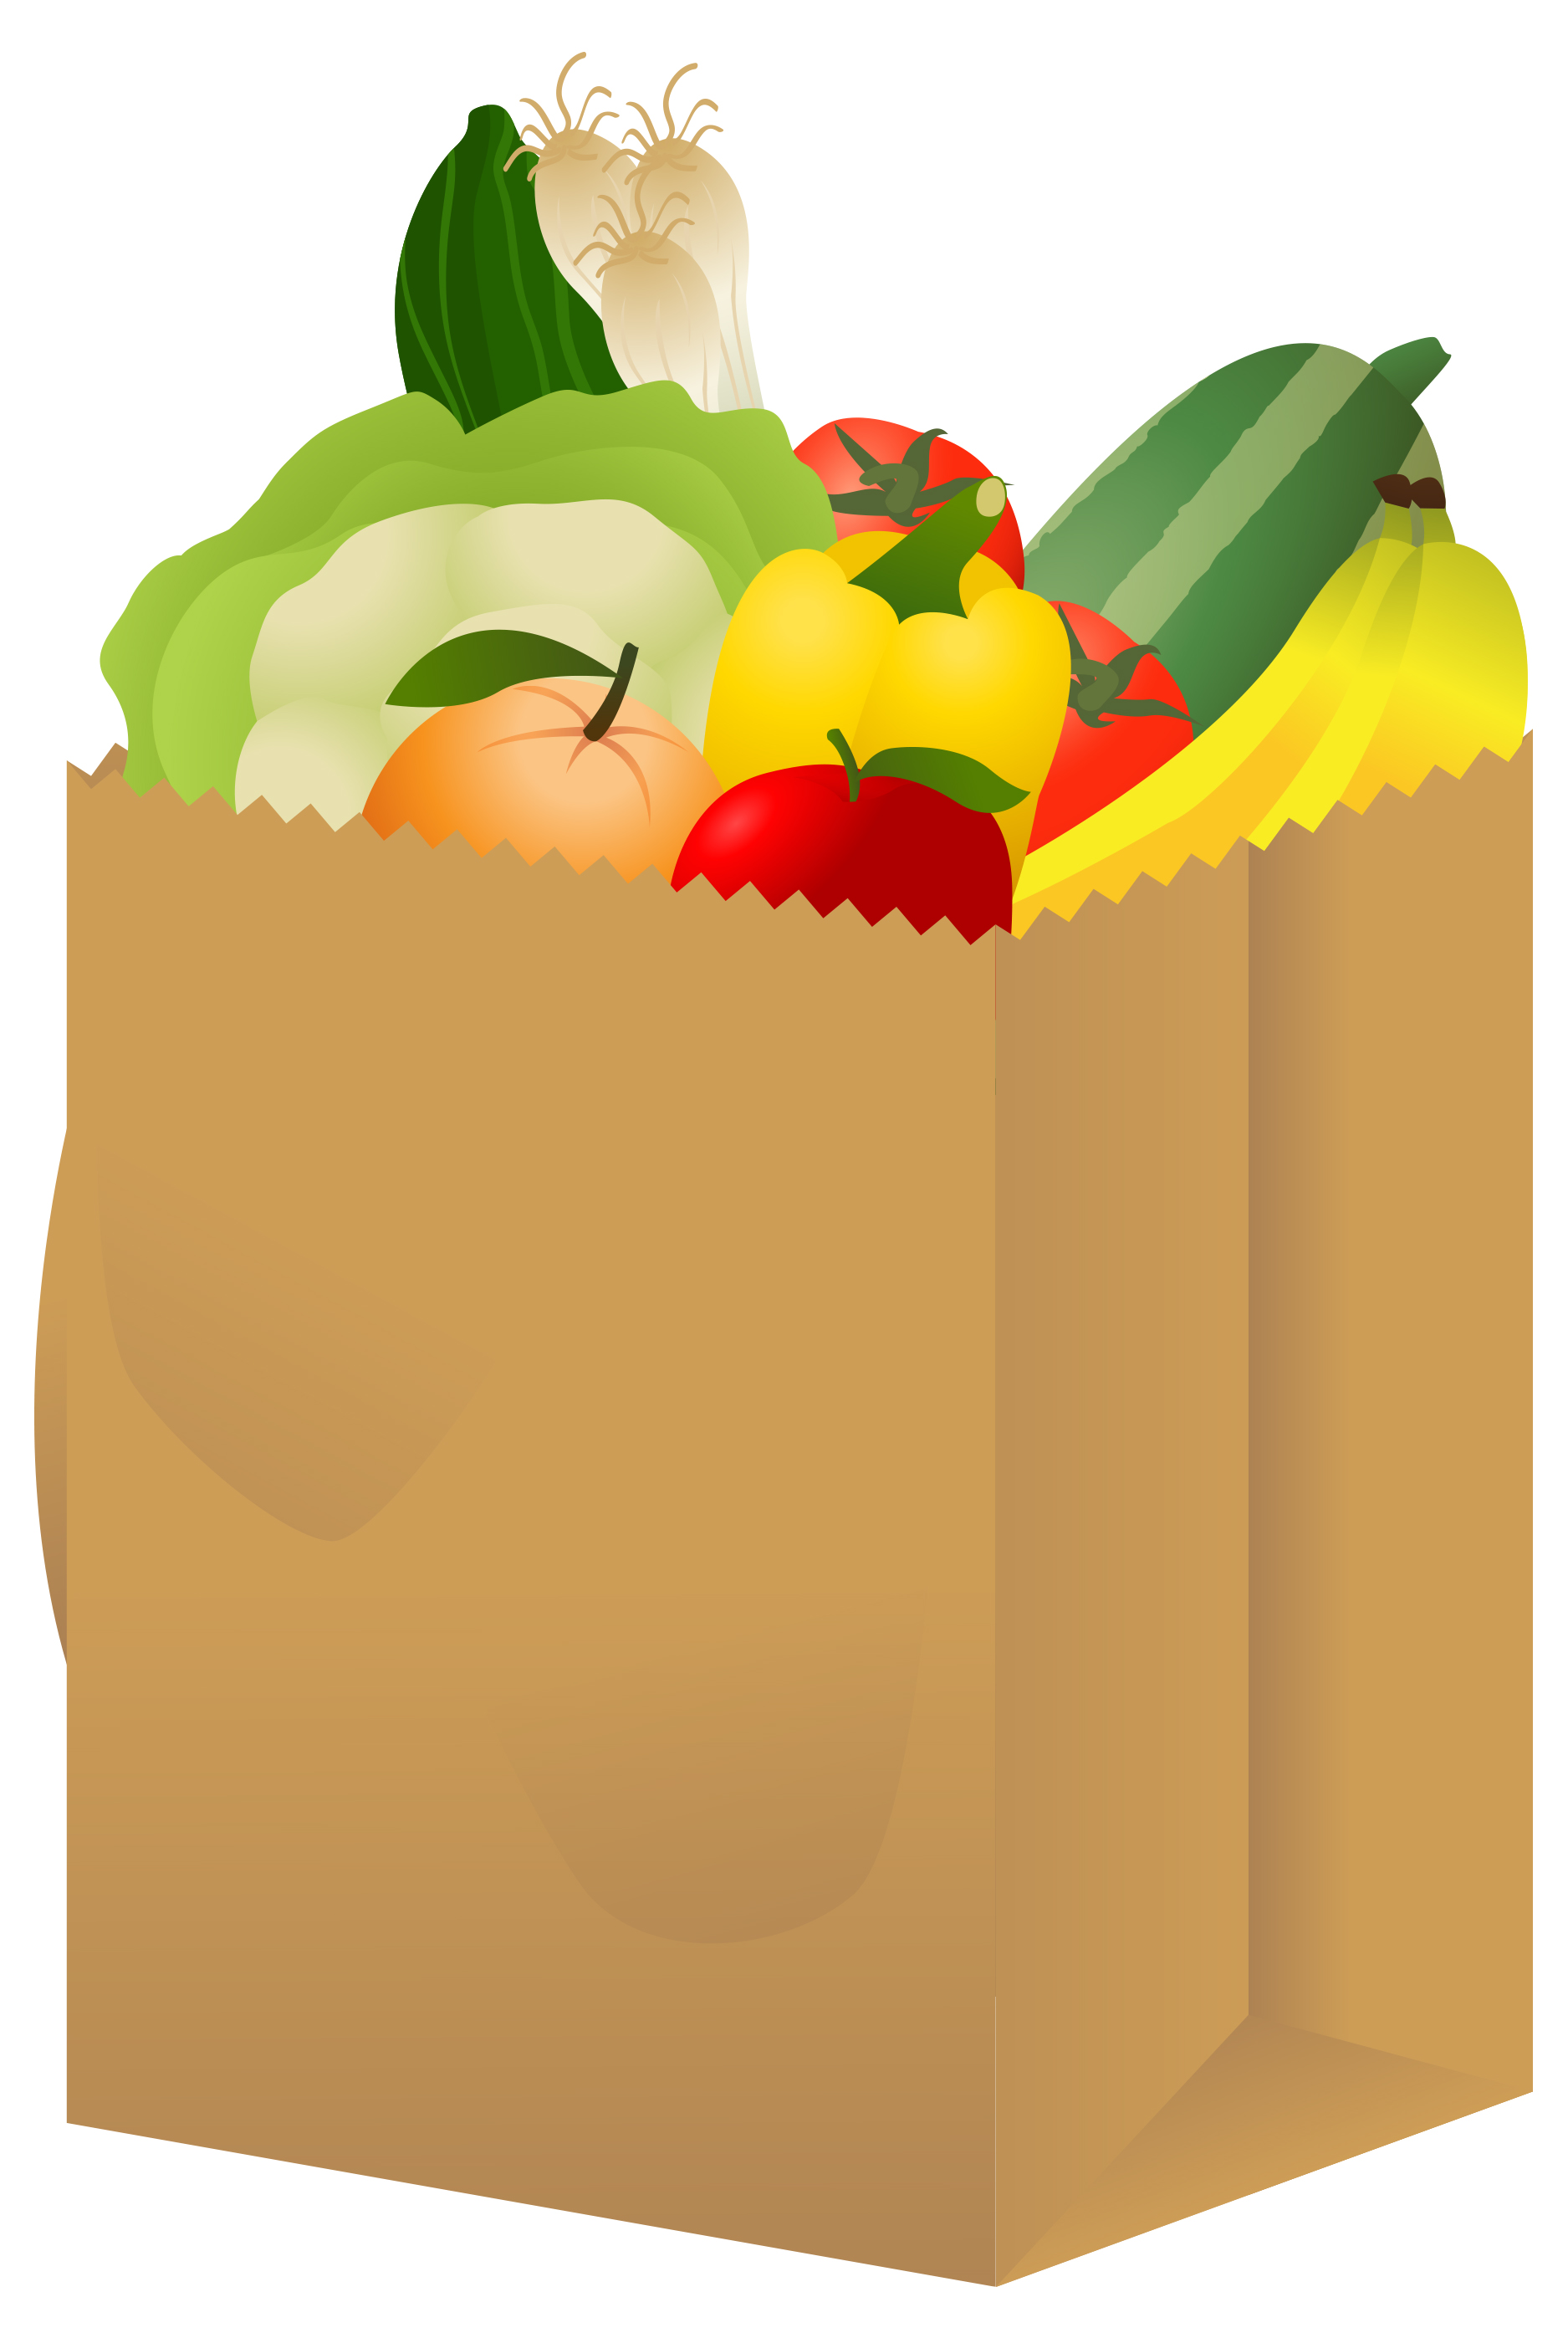 View Grocery Bag Jpg Clipart Free Nutrition And Healthy Food Clipart